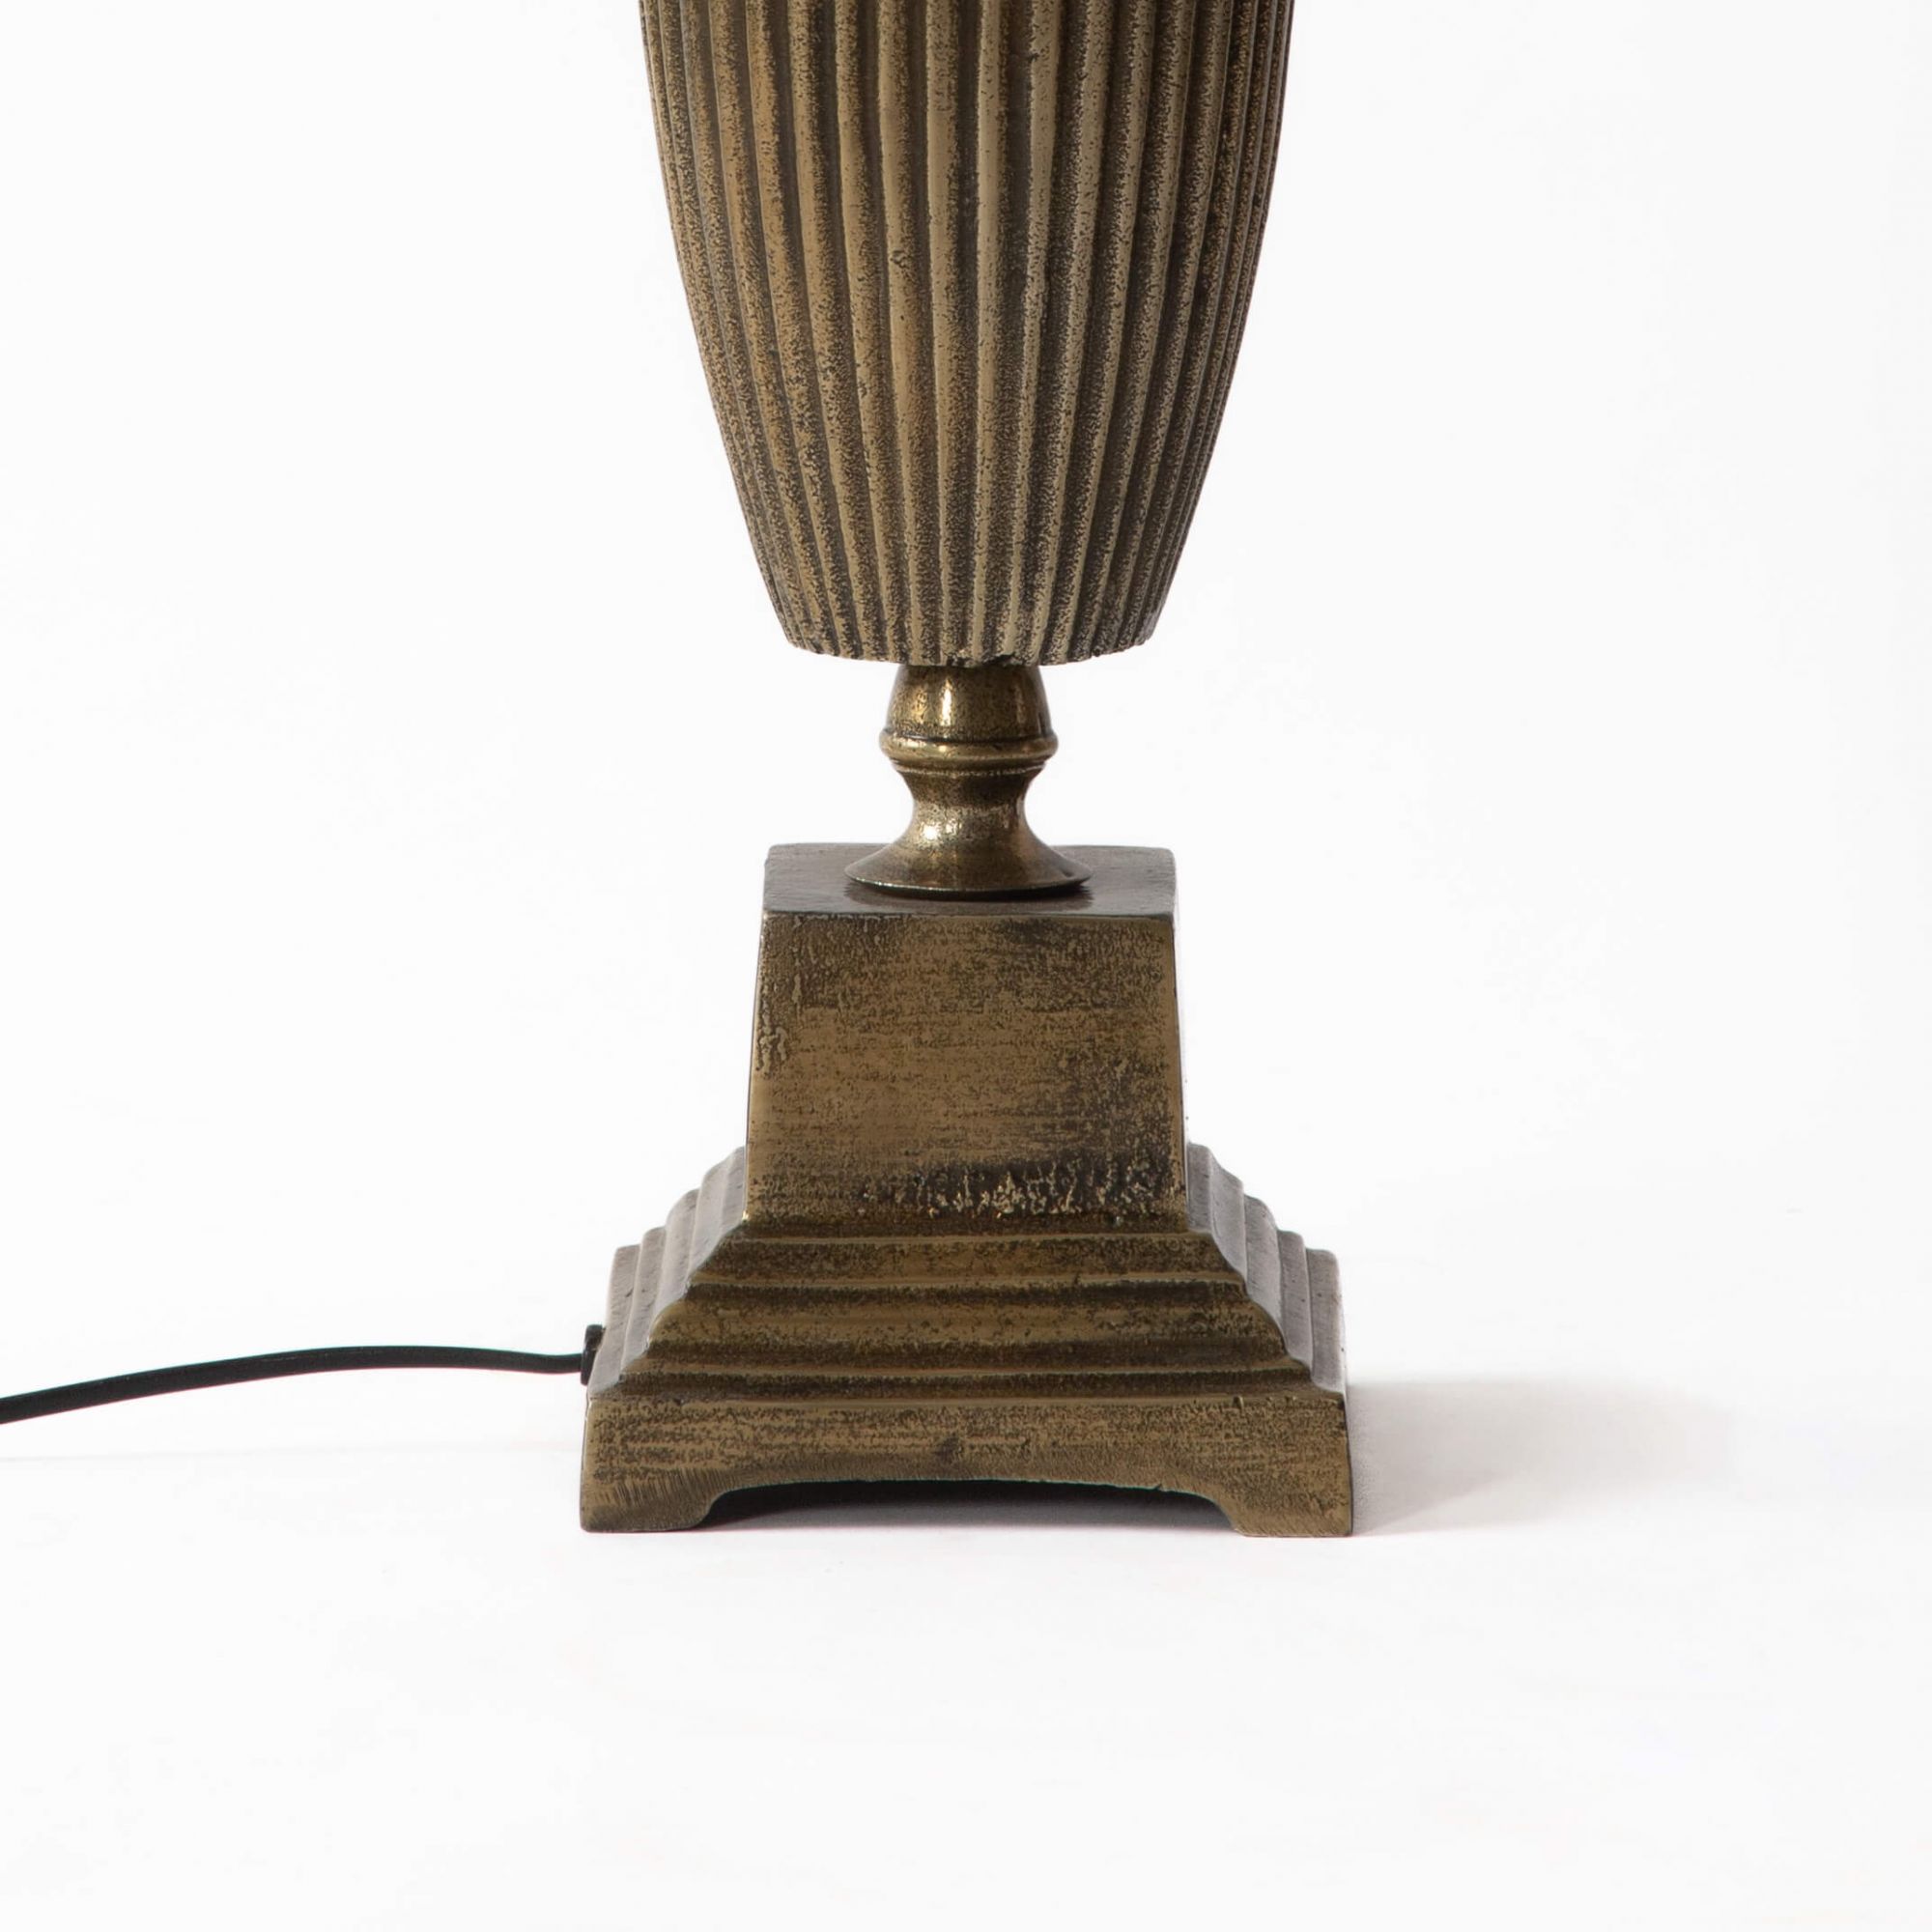 Duchess Large Lamp Stand -  Antique Brass